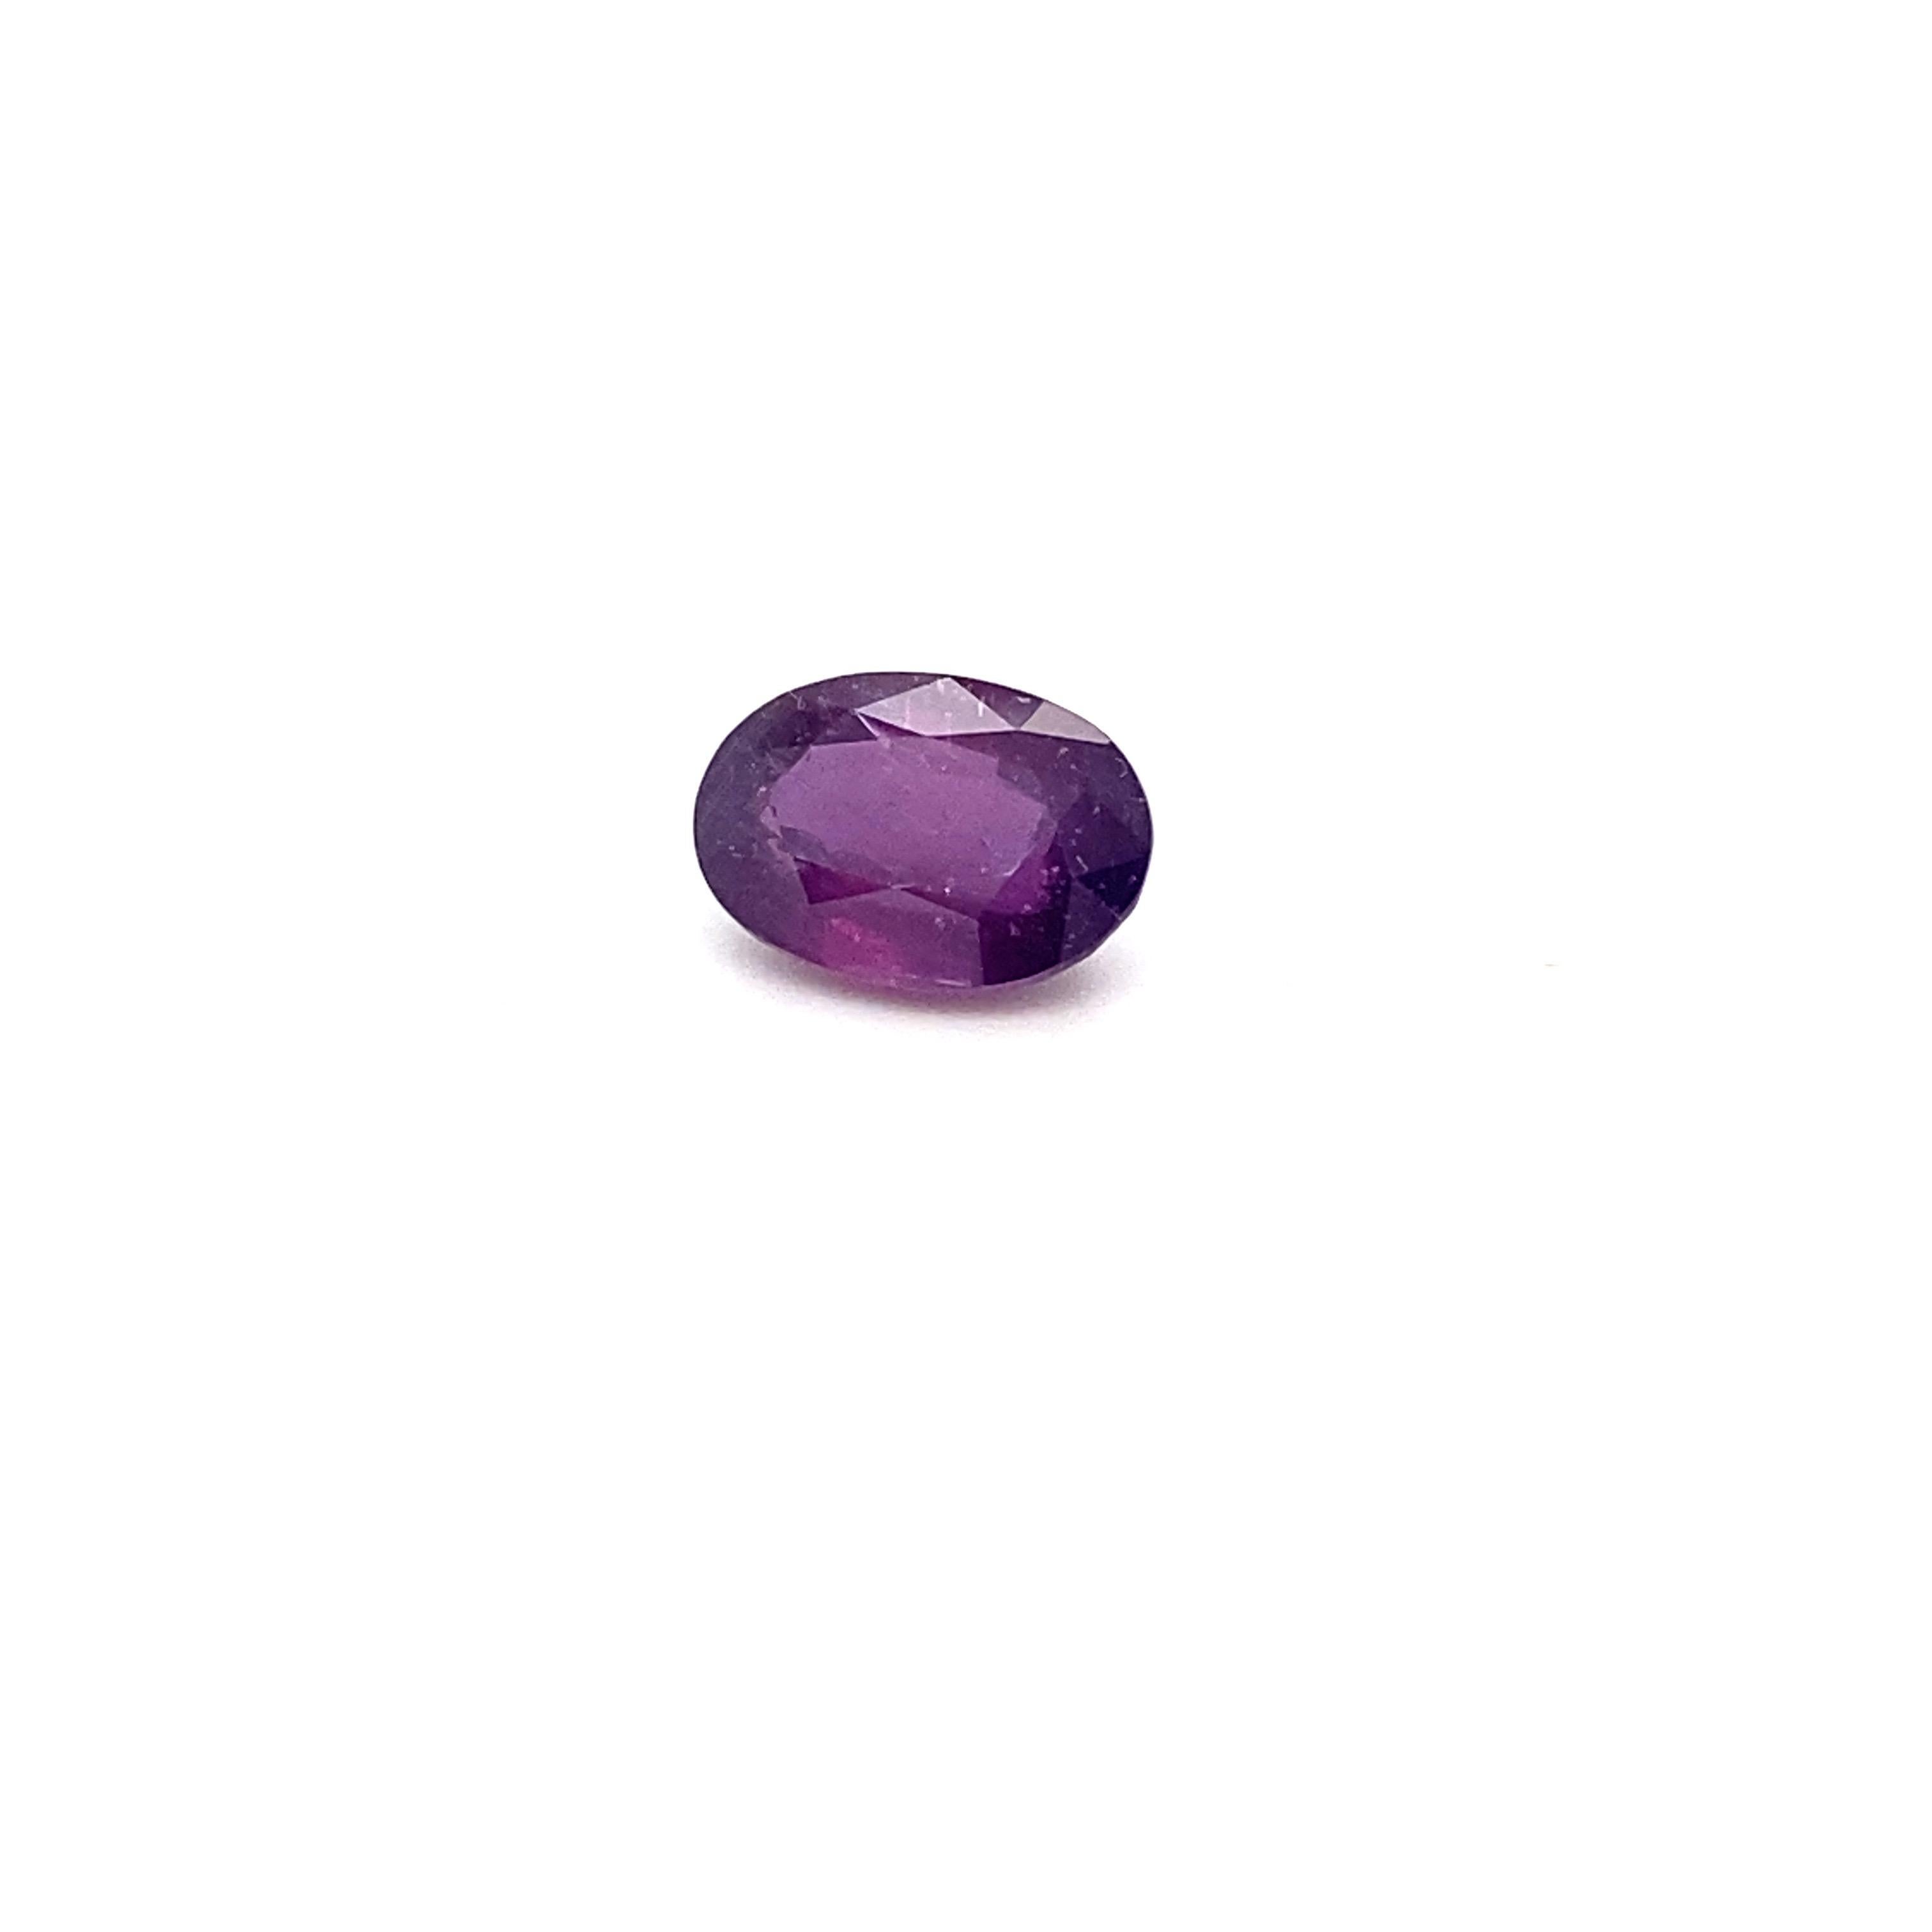 GIA Certified 5.94 Carat Oval Shape Natural Pink Purple Sapphire Loose Gemstone For Sale